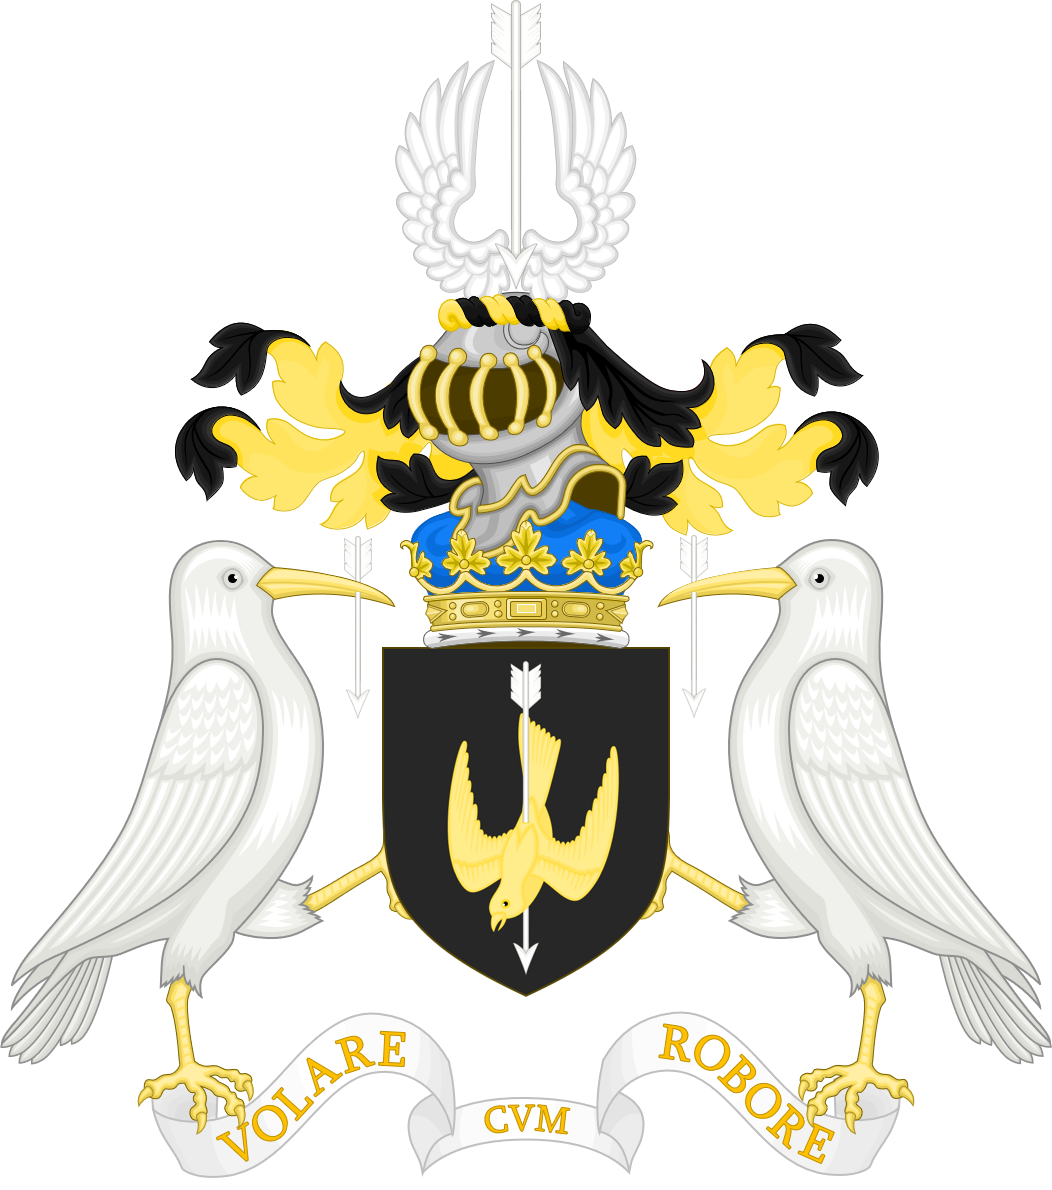 Duke of Wright coat of arms2.png